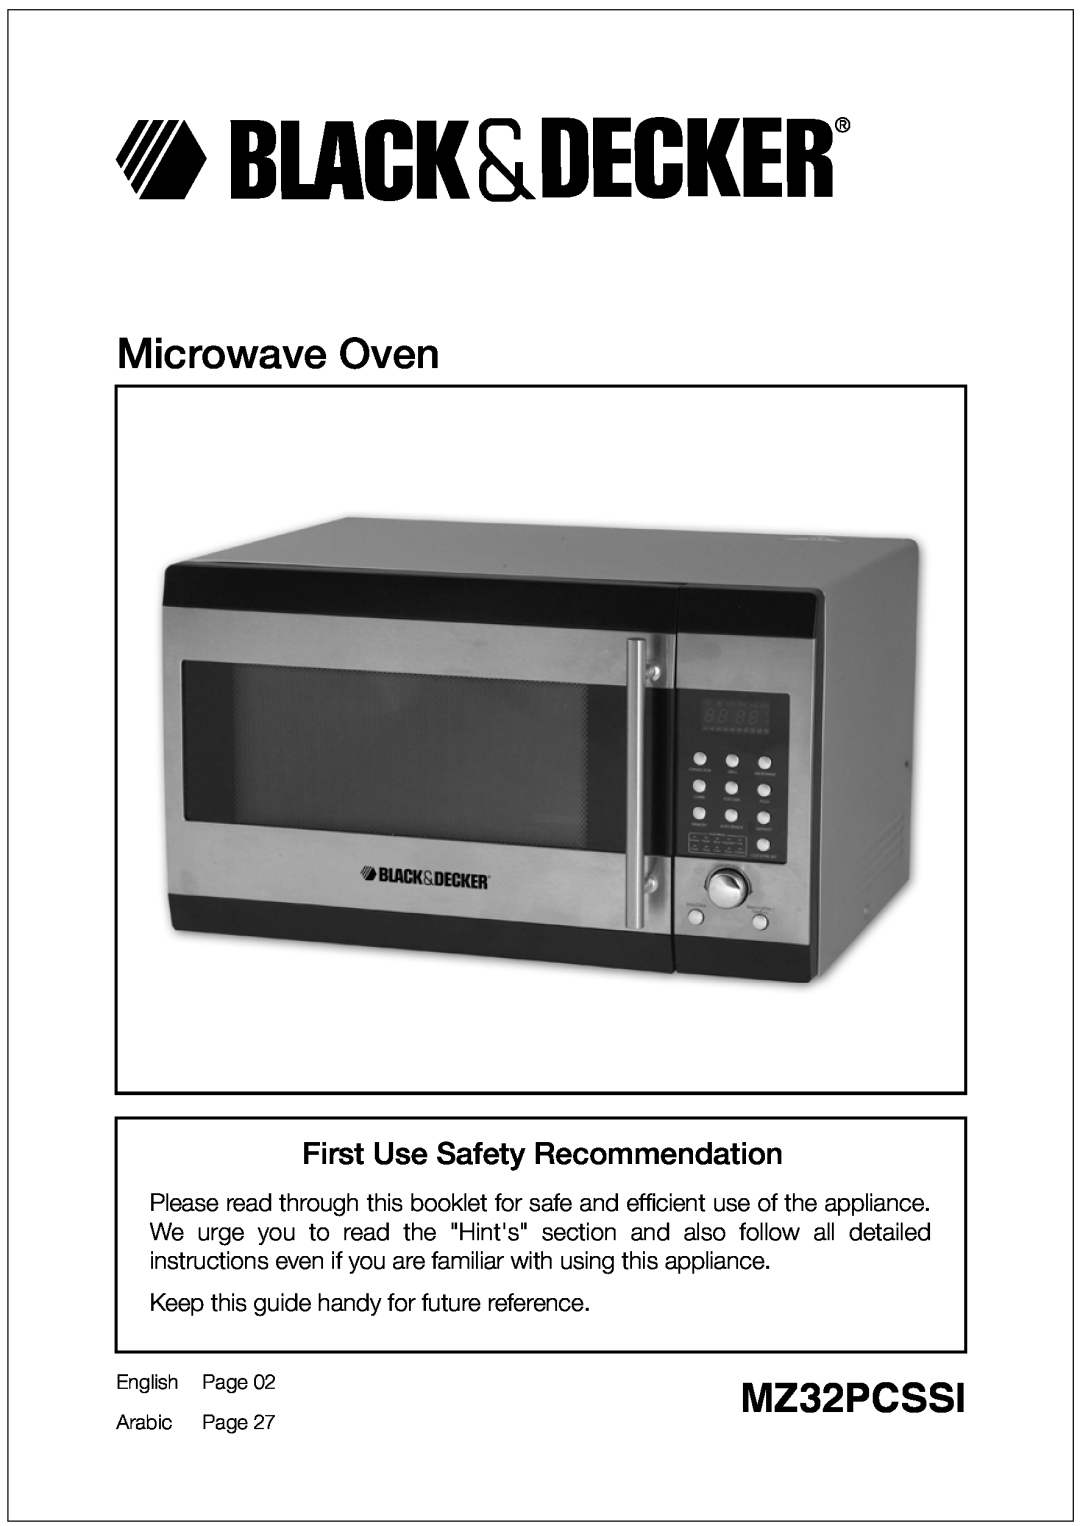 Black & Decker MZ32PCSSI manual Microwave Oven, First Use Safety Recommendation 